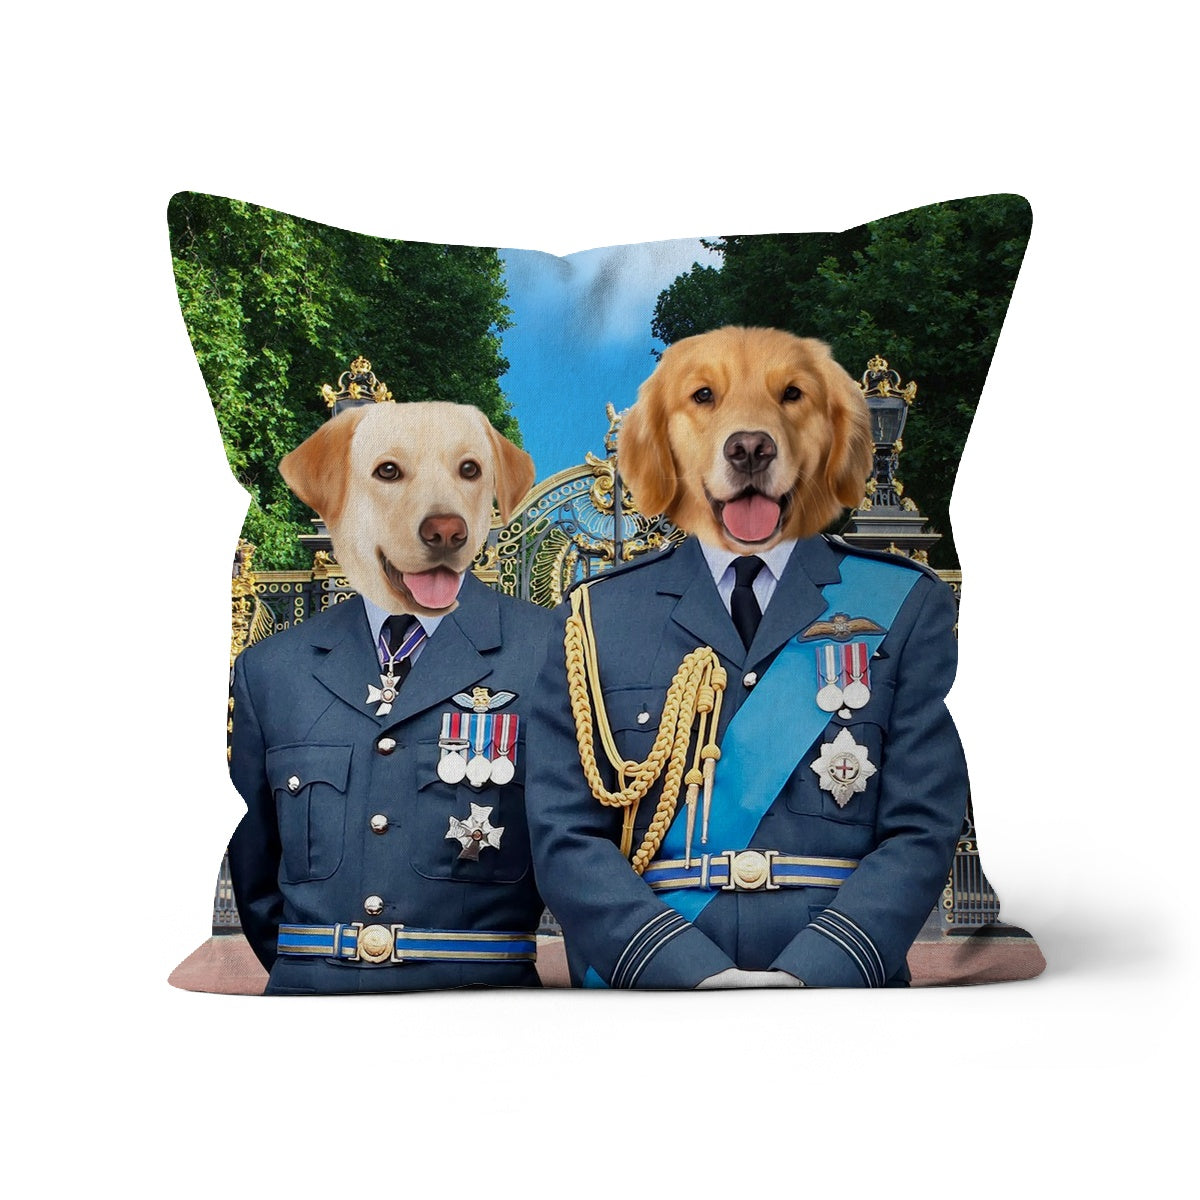 Paw & Glory, paw and glory, best custom pet pillow, custom animal pillow, pillows with pictures of pets, pet pillow picture, custom design pillows, custom pet portrait pillow, Pet Portraits cushion,